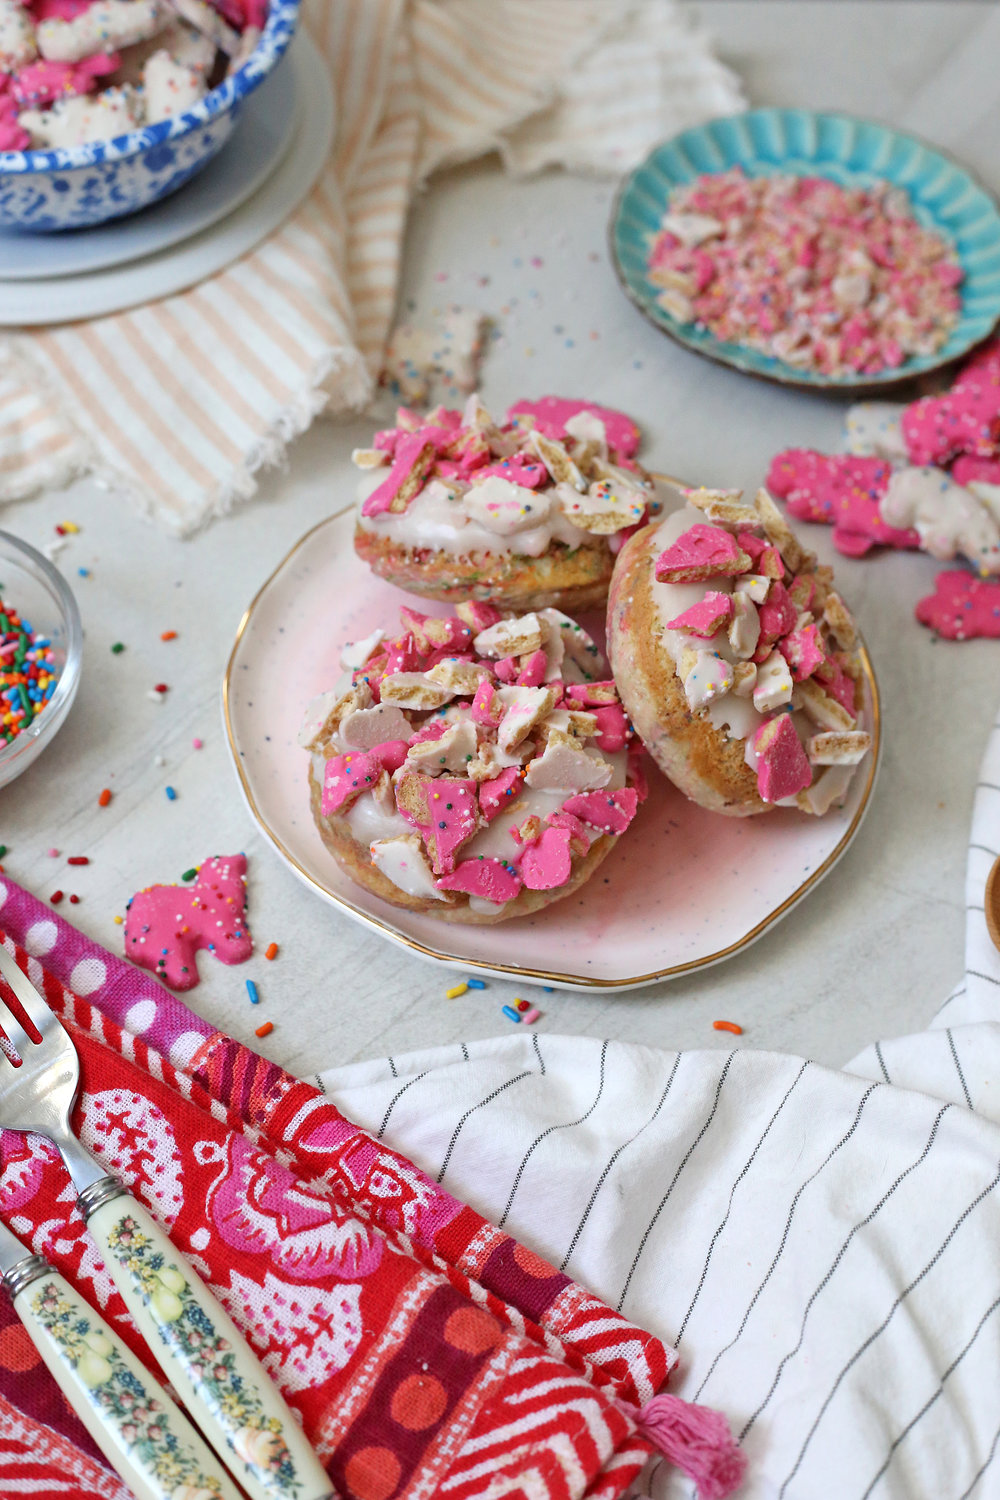 Frosted Animal Cracker Donuts via Unusuallylovely.com